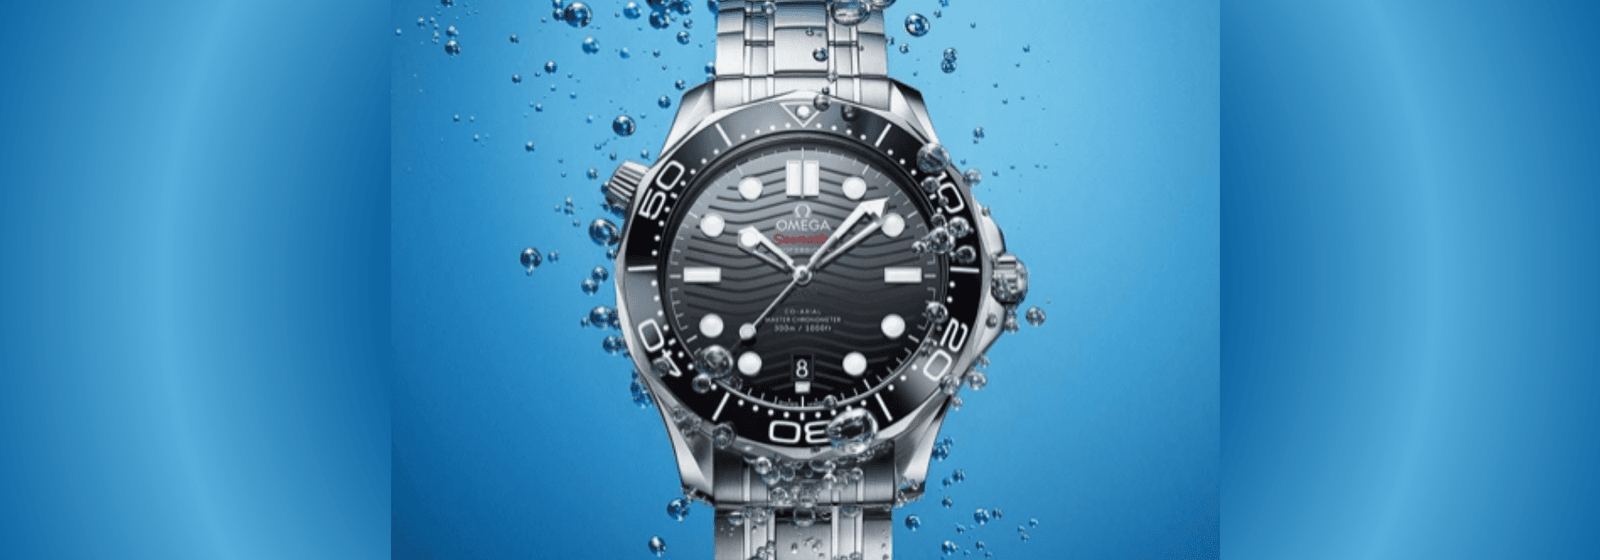 THM Suggests: Racing Underwater With Top 5 Diver Watches